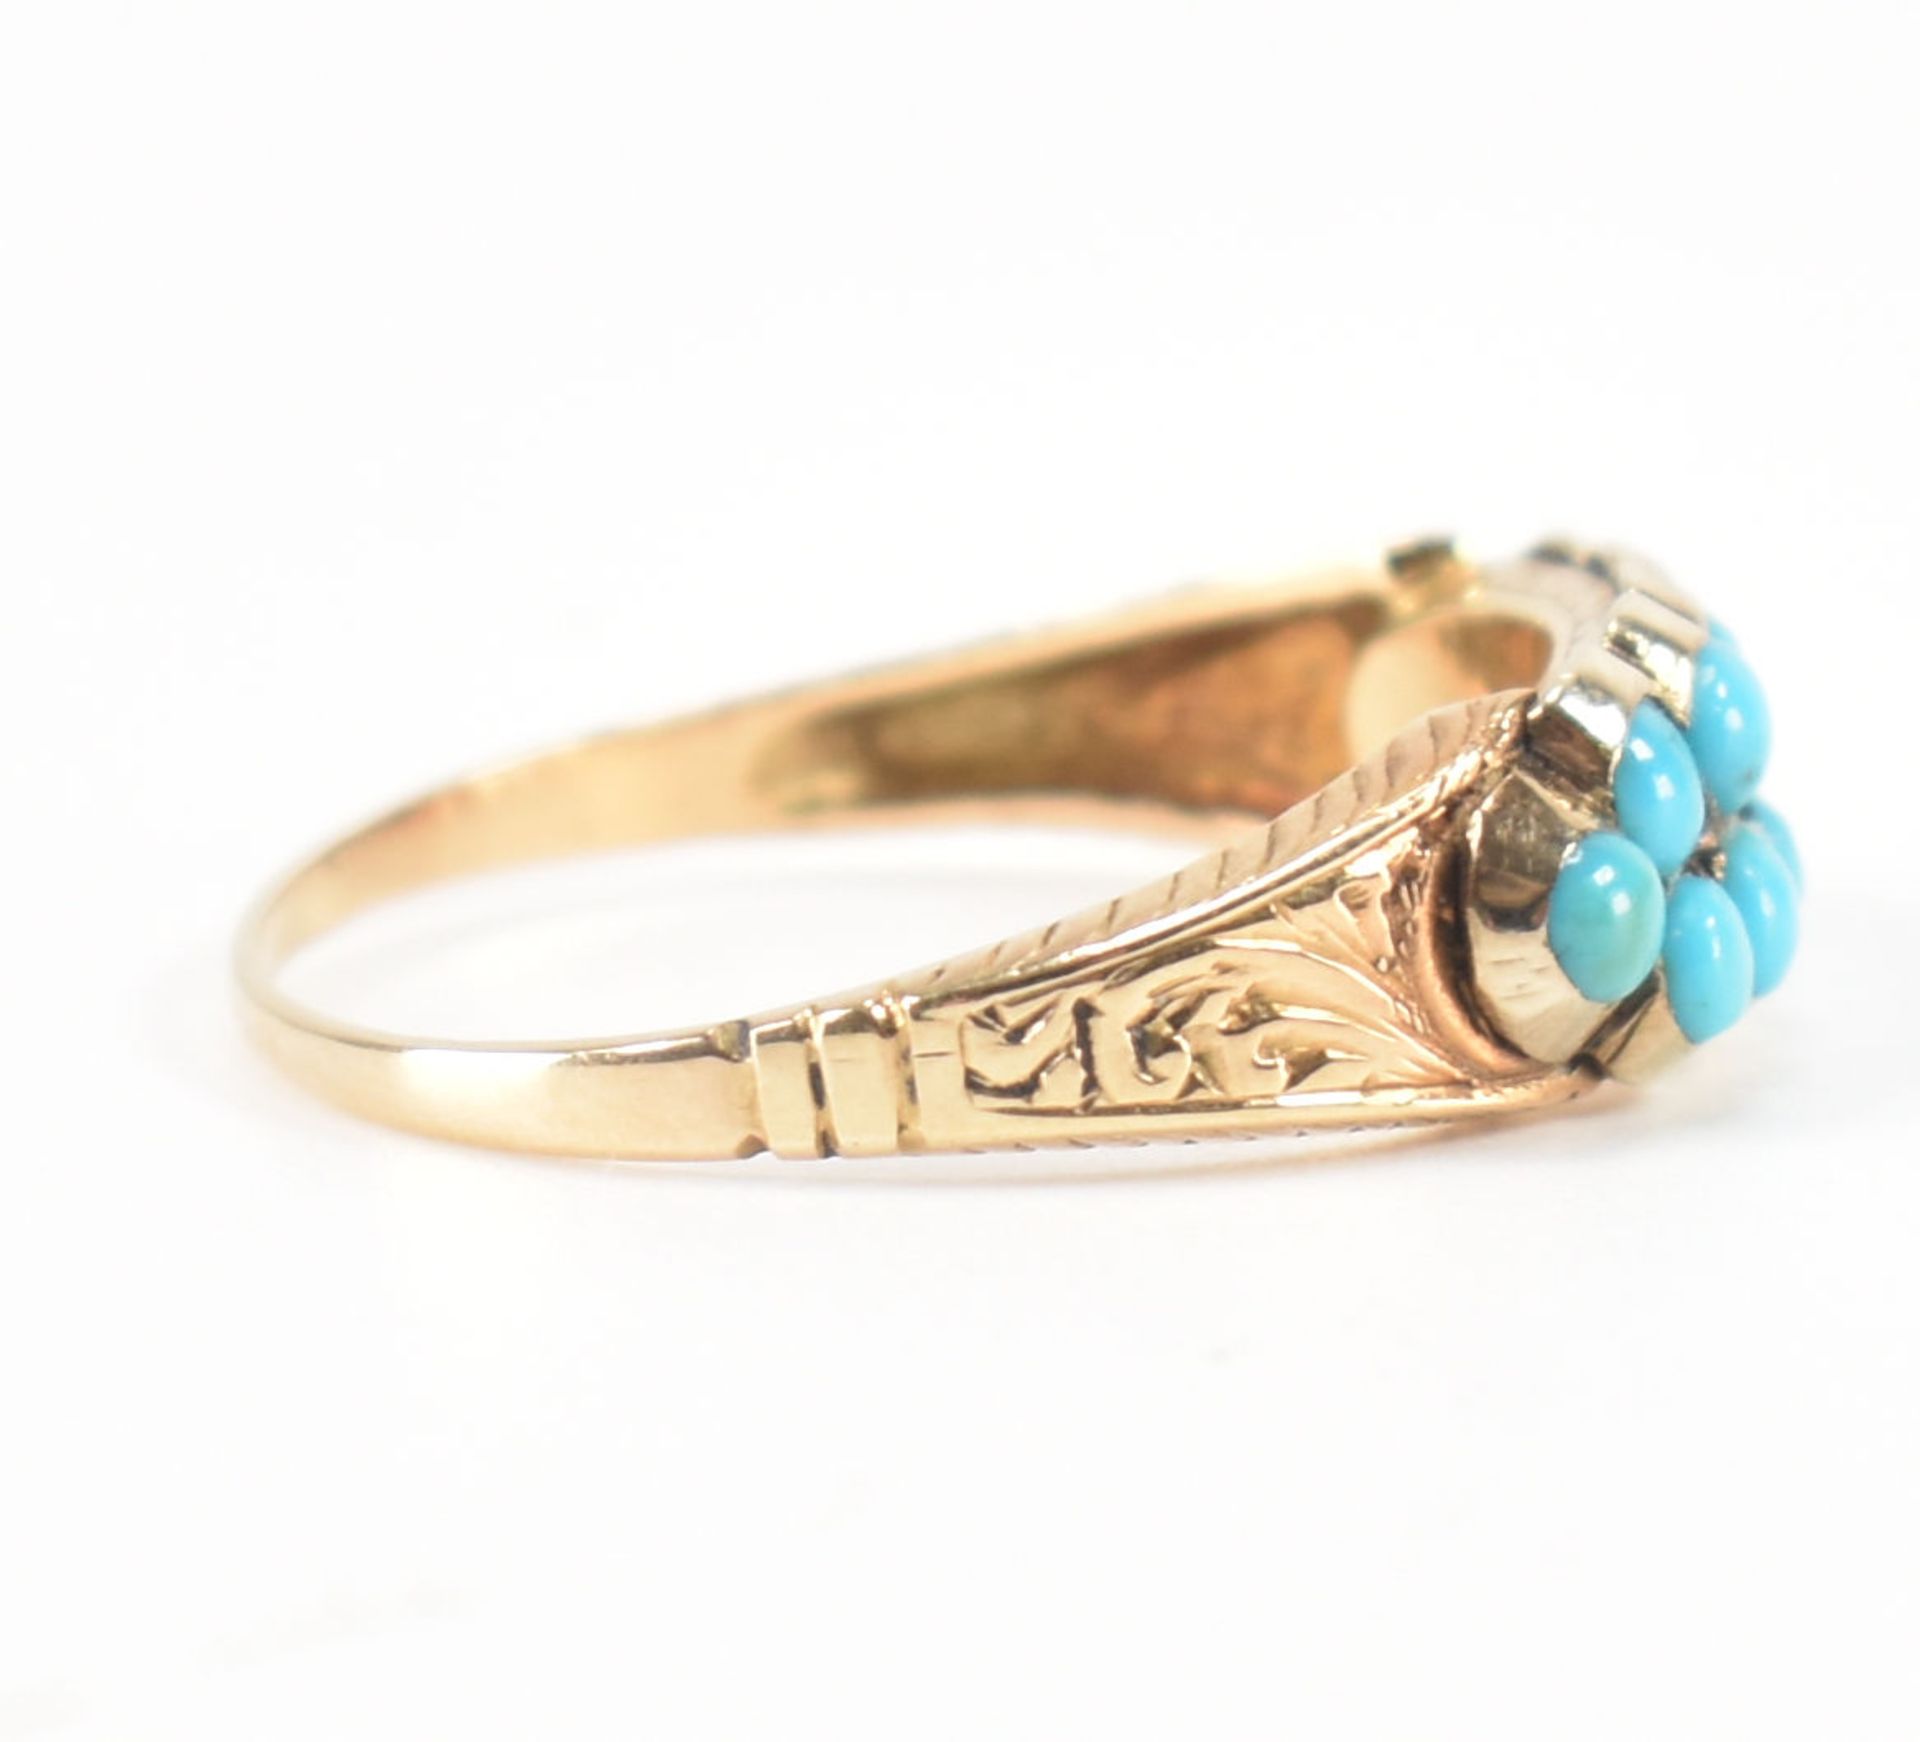 ANTIQUE GOLD & TURQUOISE GYPSY CLUSTER RING - Image 6 of 8